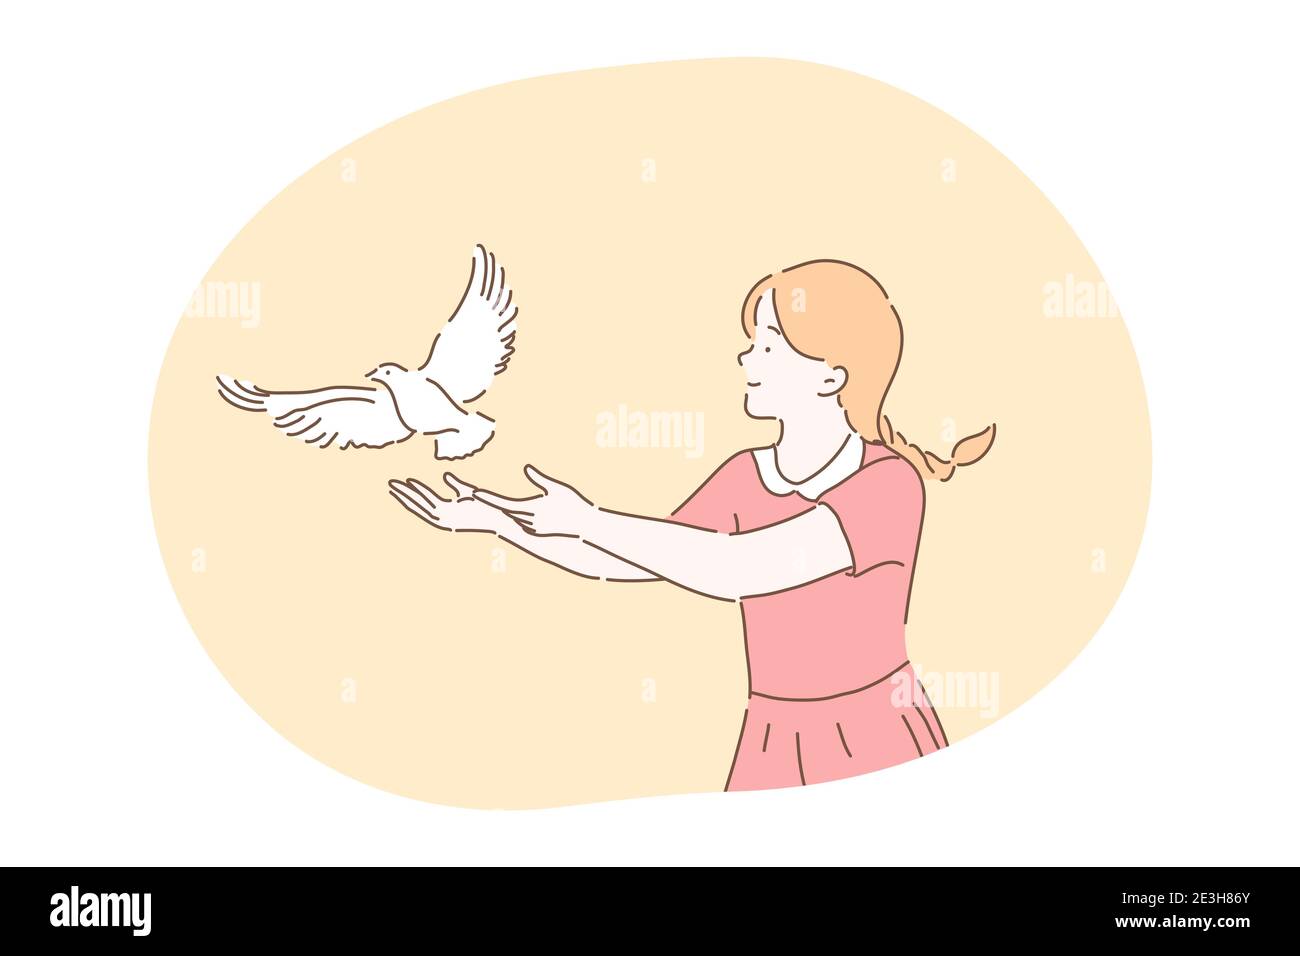 Freedom, peace, harmony, release, kindness concept. Young kind smiling girl cartoon character in dress standing and letting white pigeon dove bird fly Stock Vector